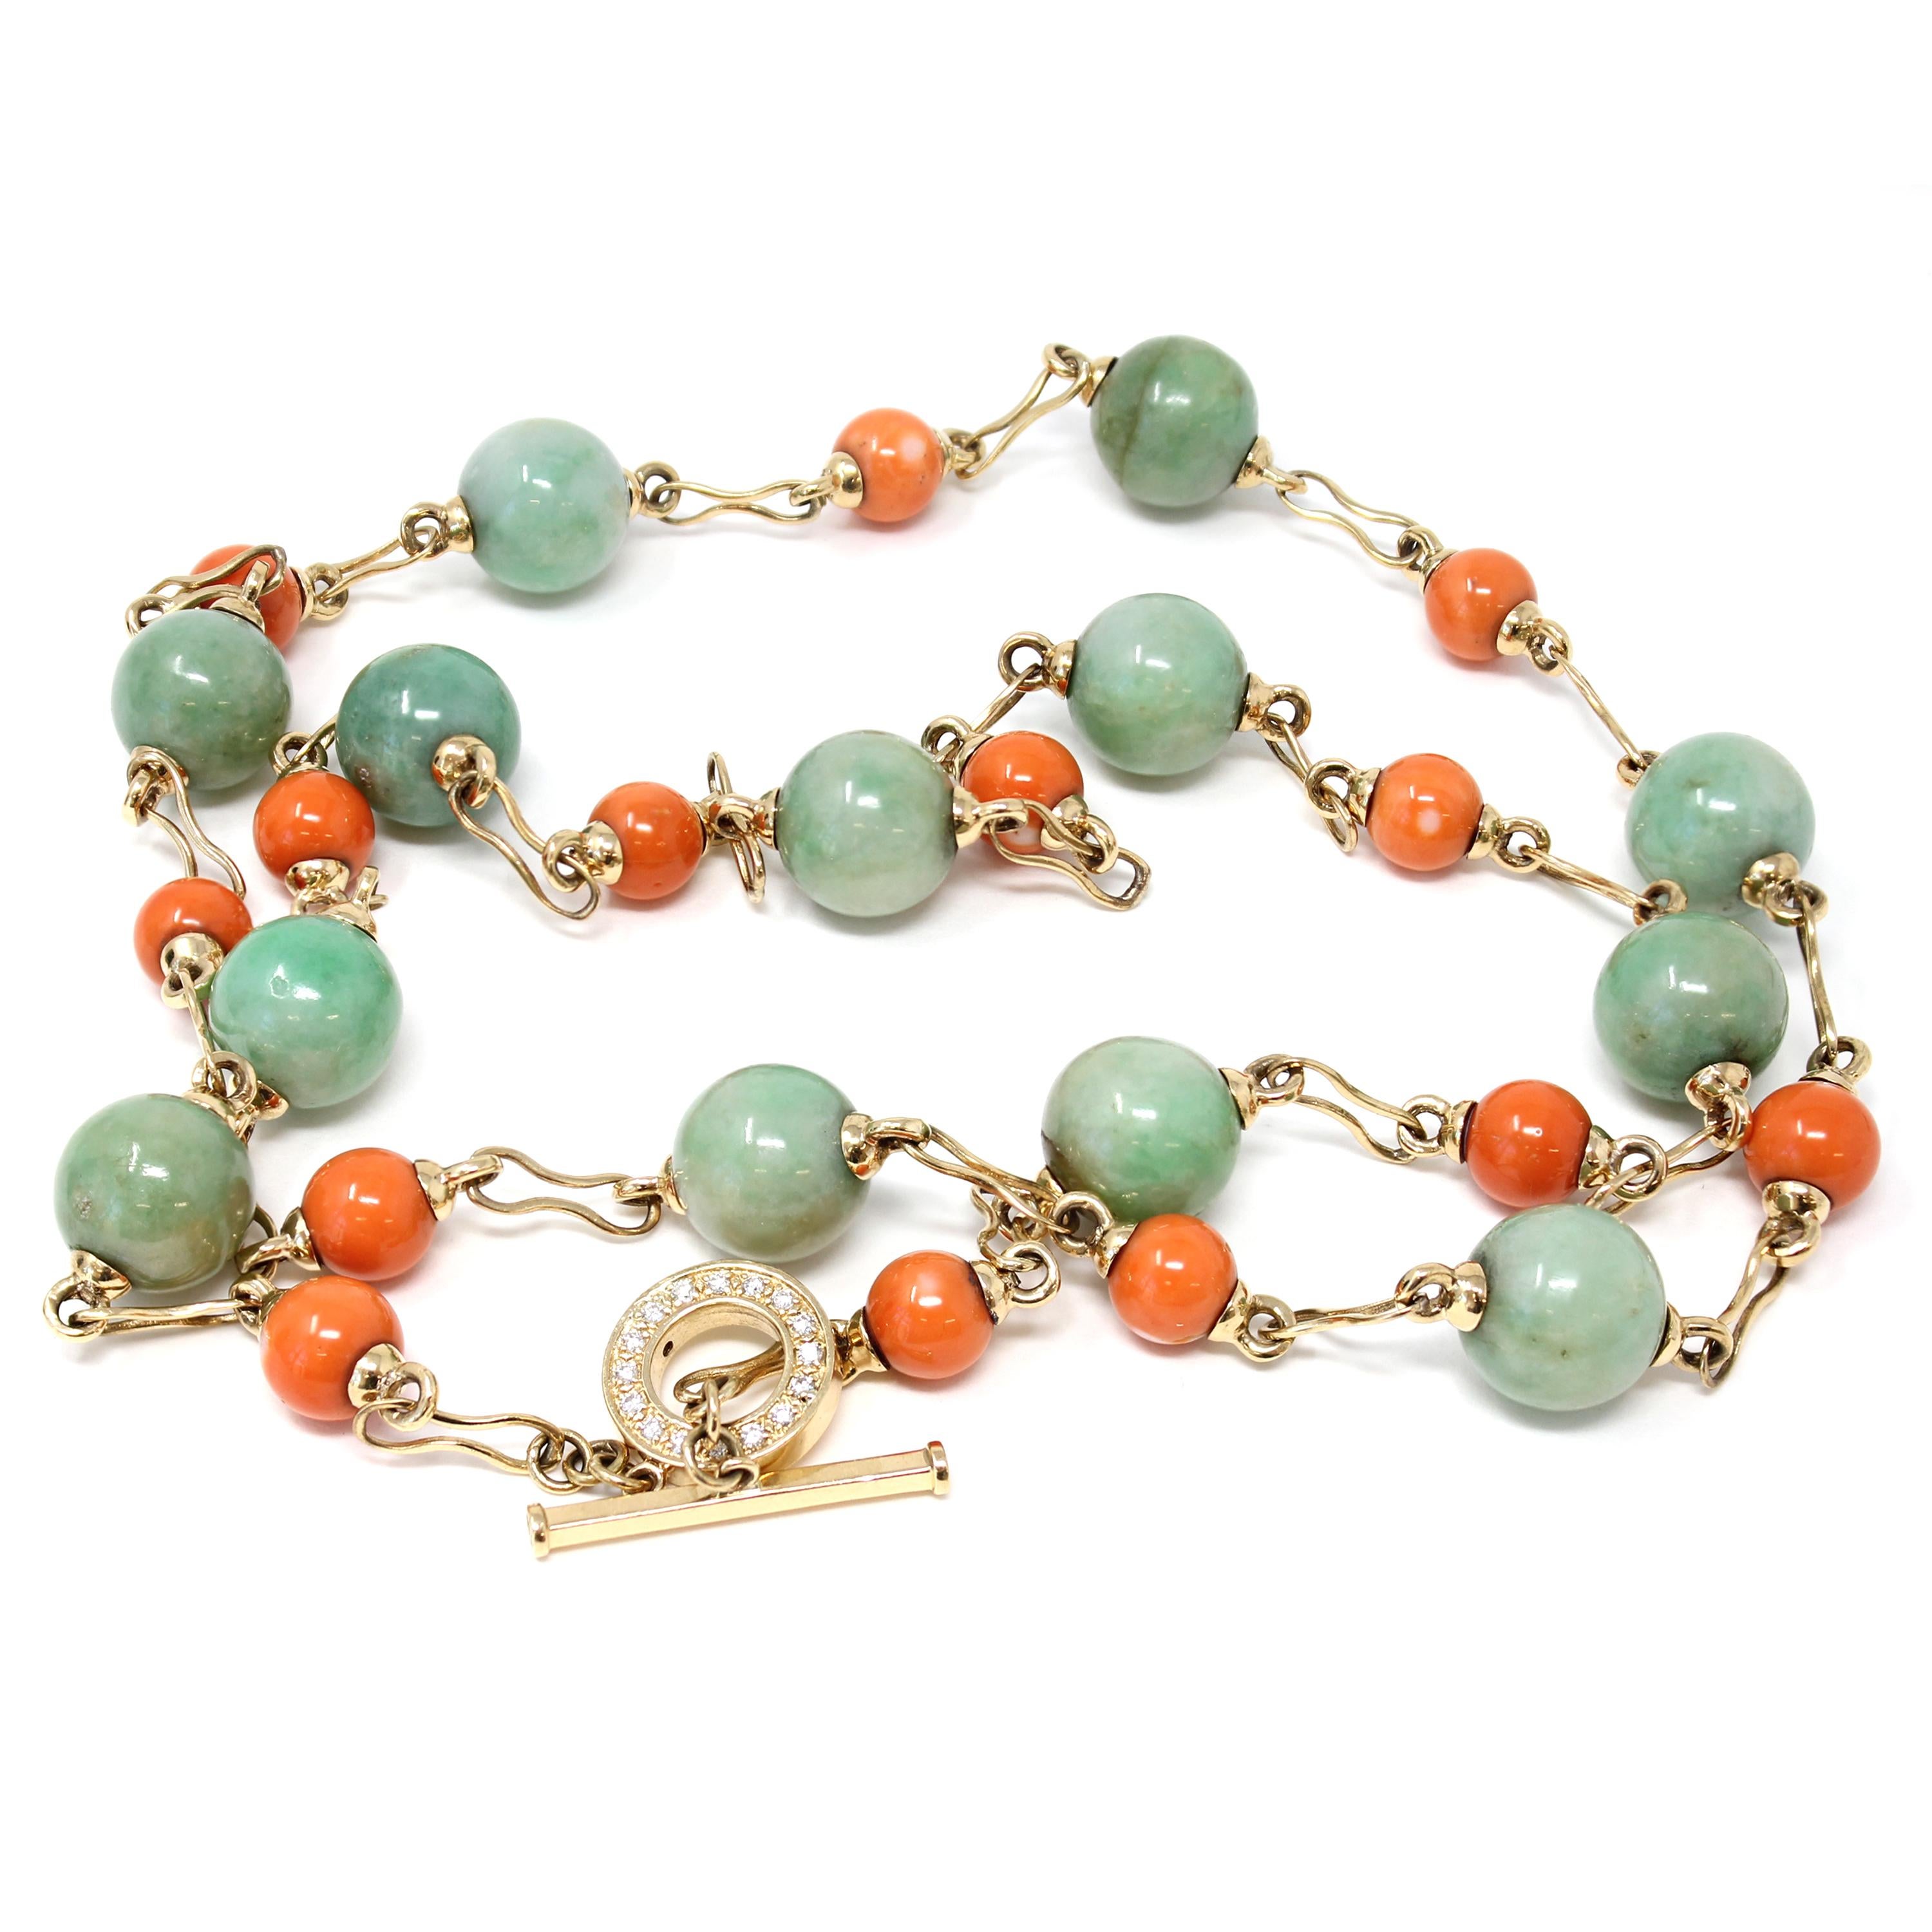 This One of a kind necklace by Rosaria Varra features natural vintage Jadeite jade apple green beads alternating with natural salmon color coral made into a station style necklace set in 18 yellow gold. The apple green jade beads measure 14.3mm